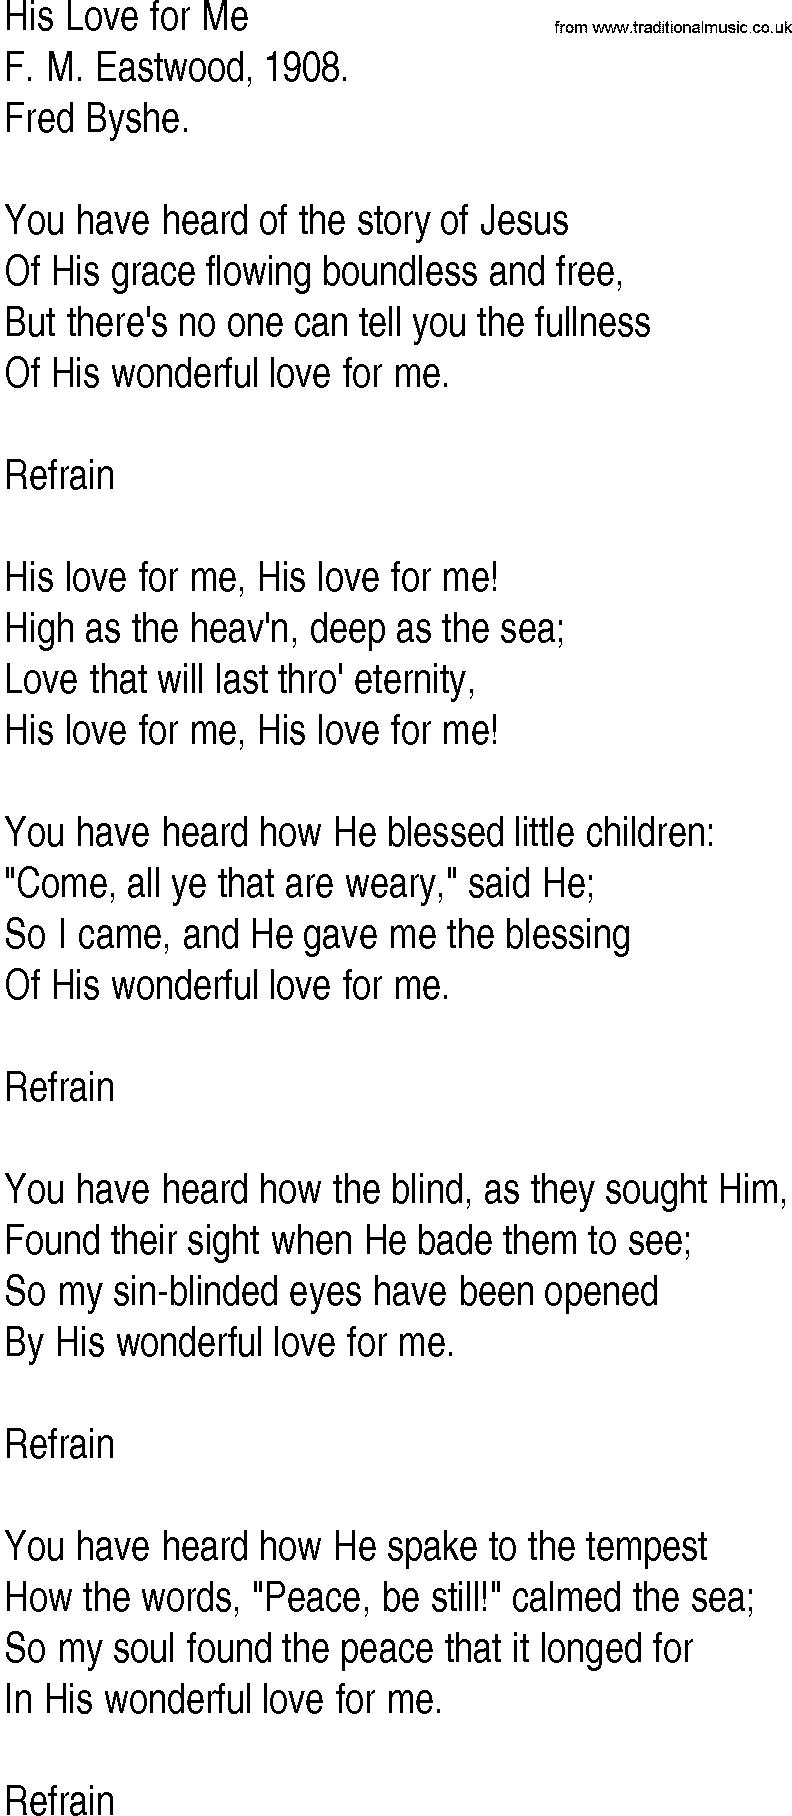 Hymn and Gospel Song: His Love for Me by F M Eastwood lyrics